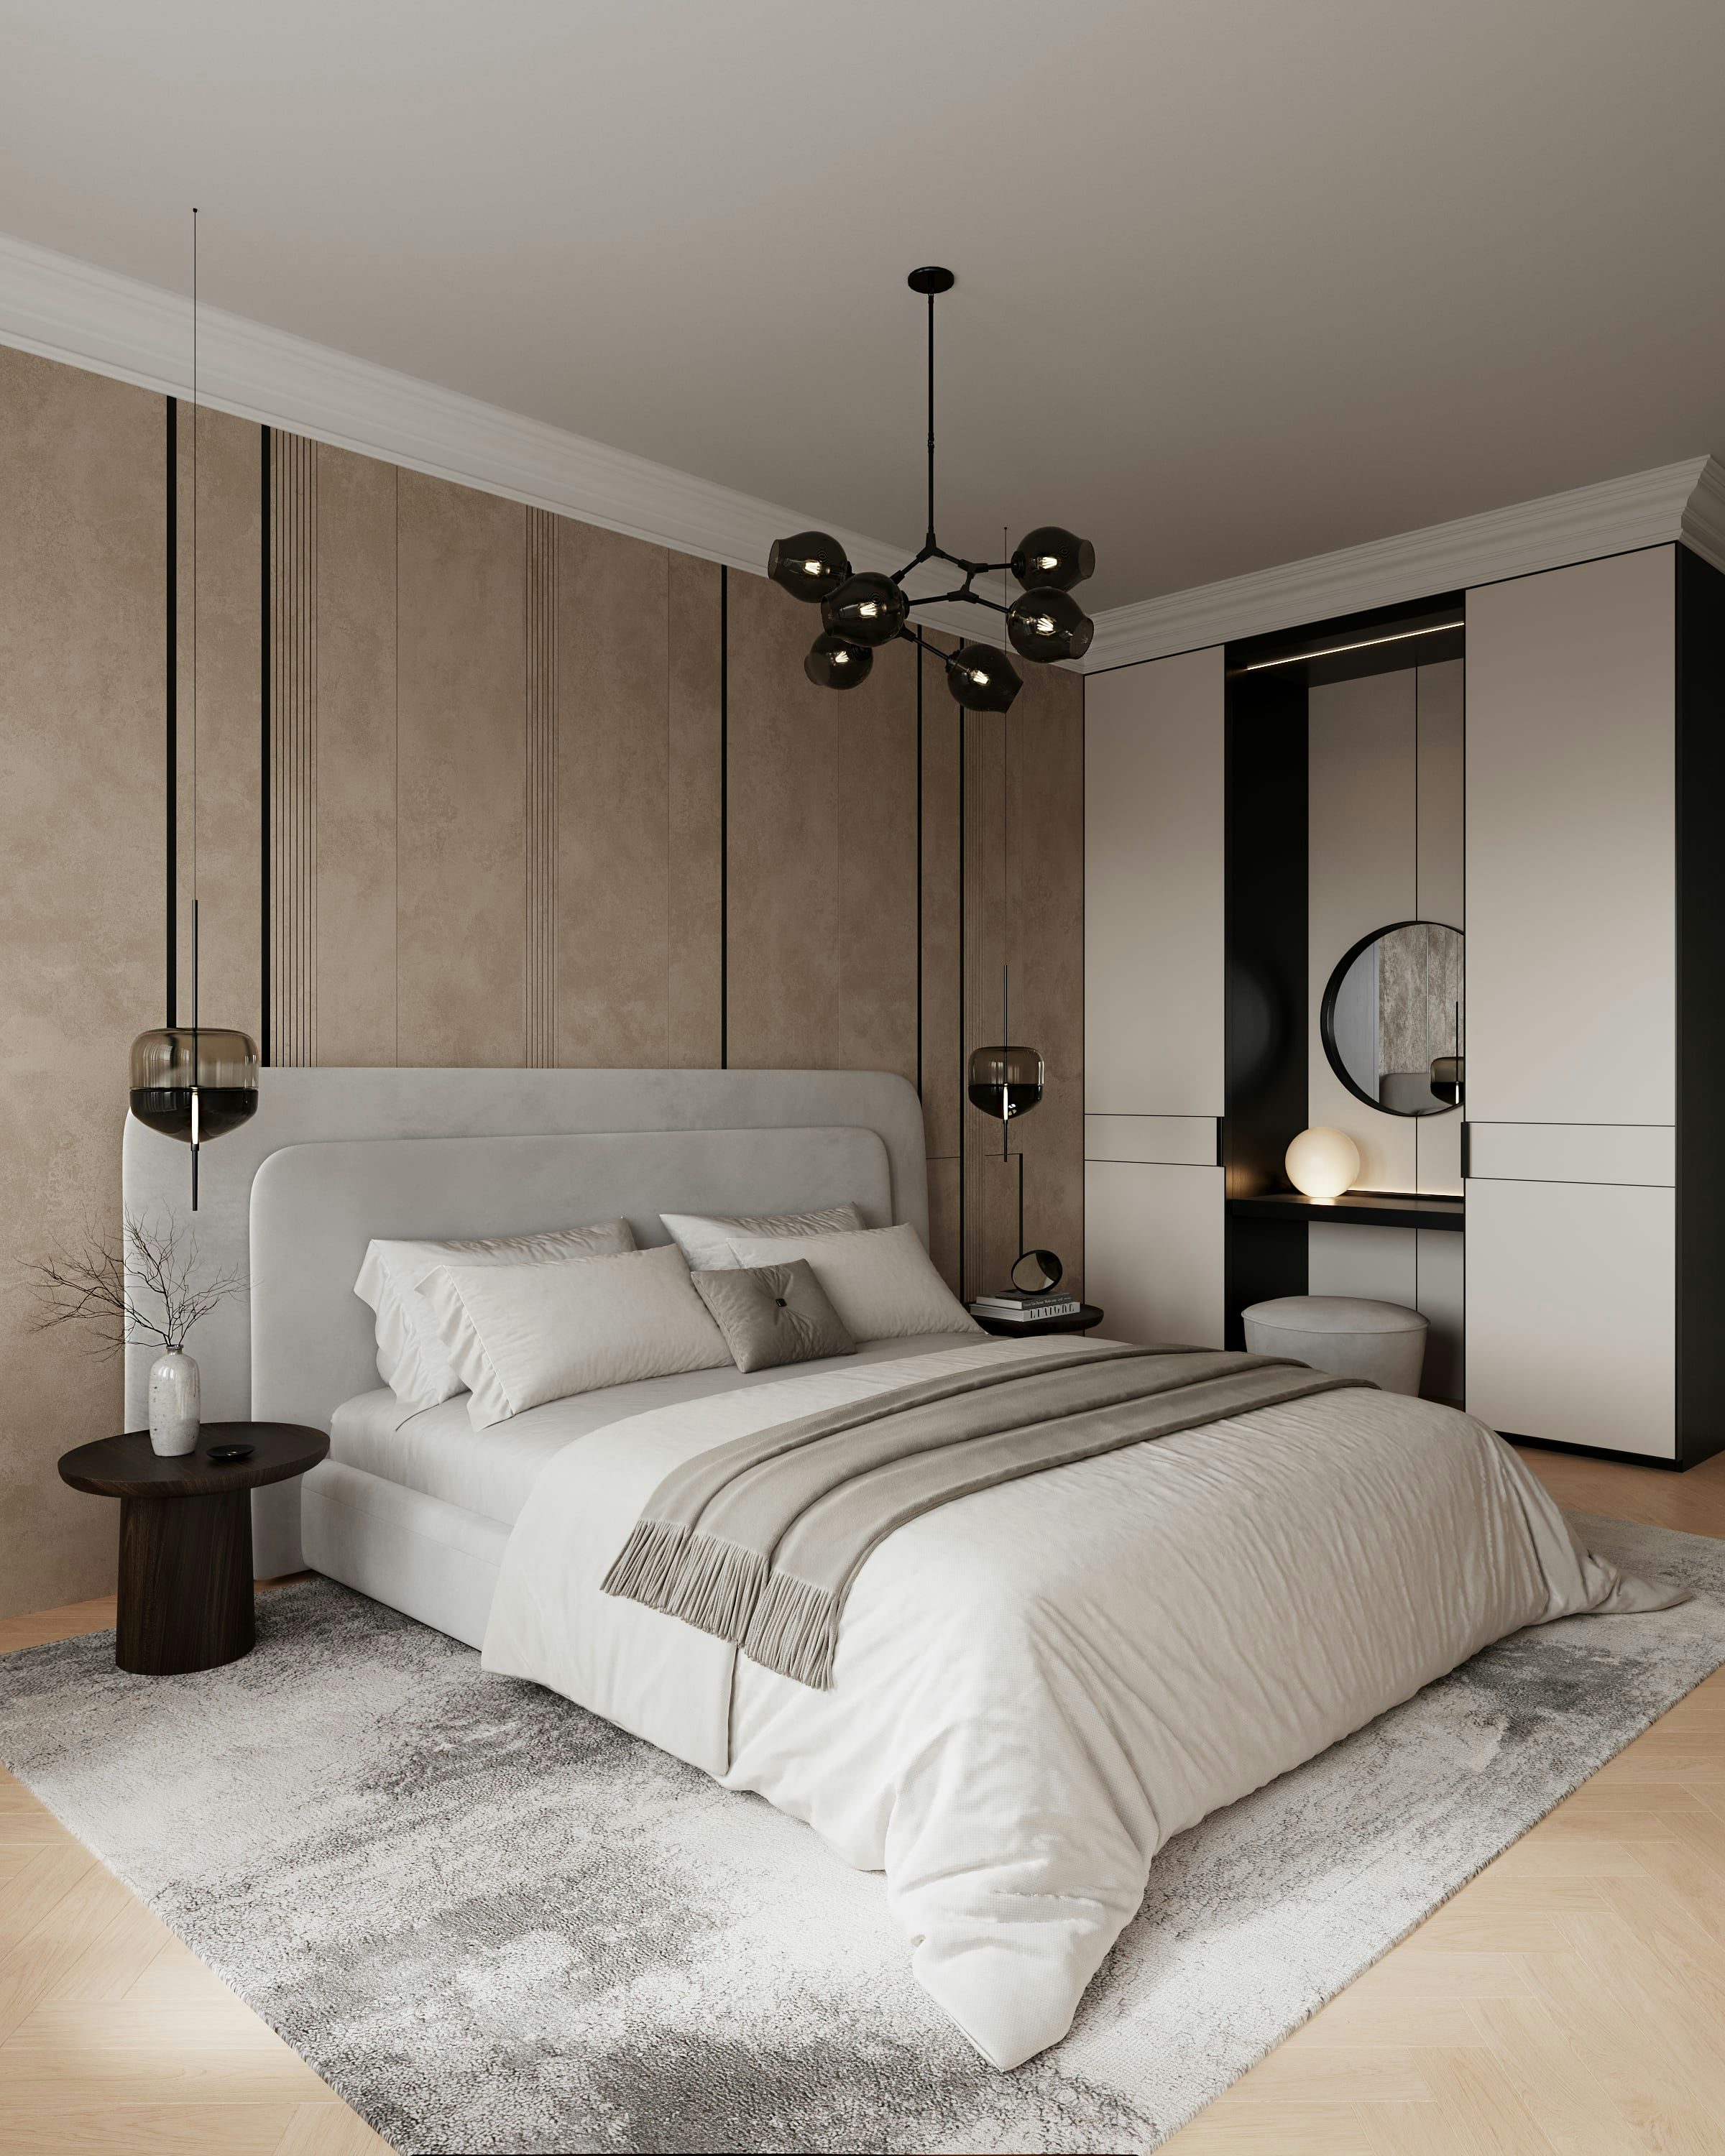 3D Architectural Visualization Bedroom Potsdam Germany